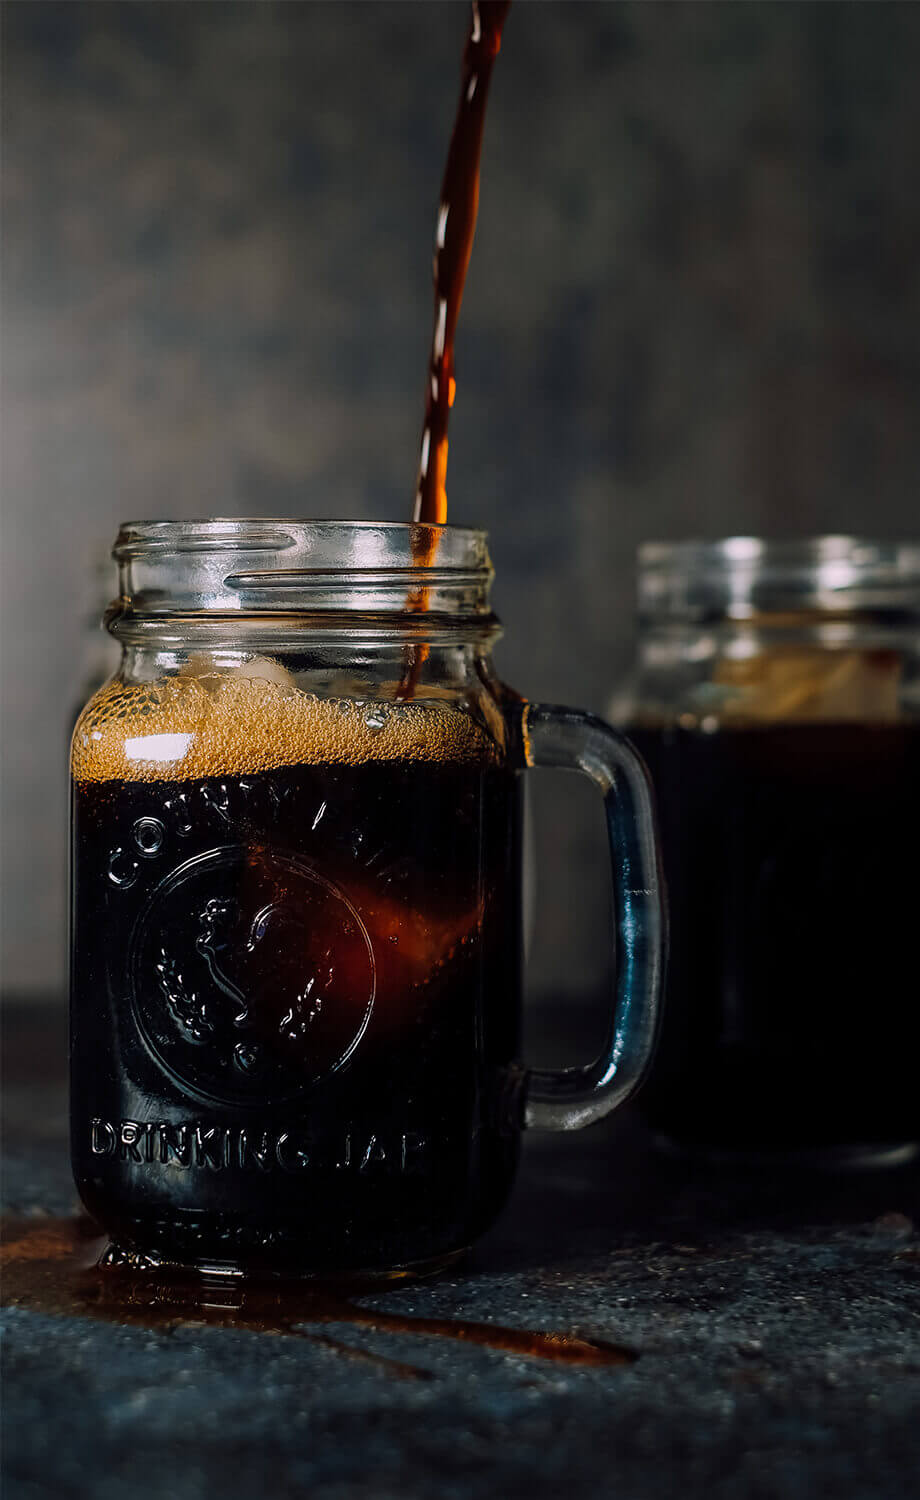 Độ axit trong cold brew